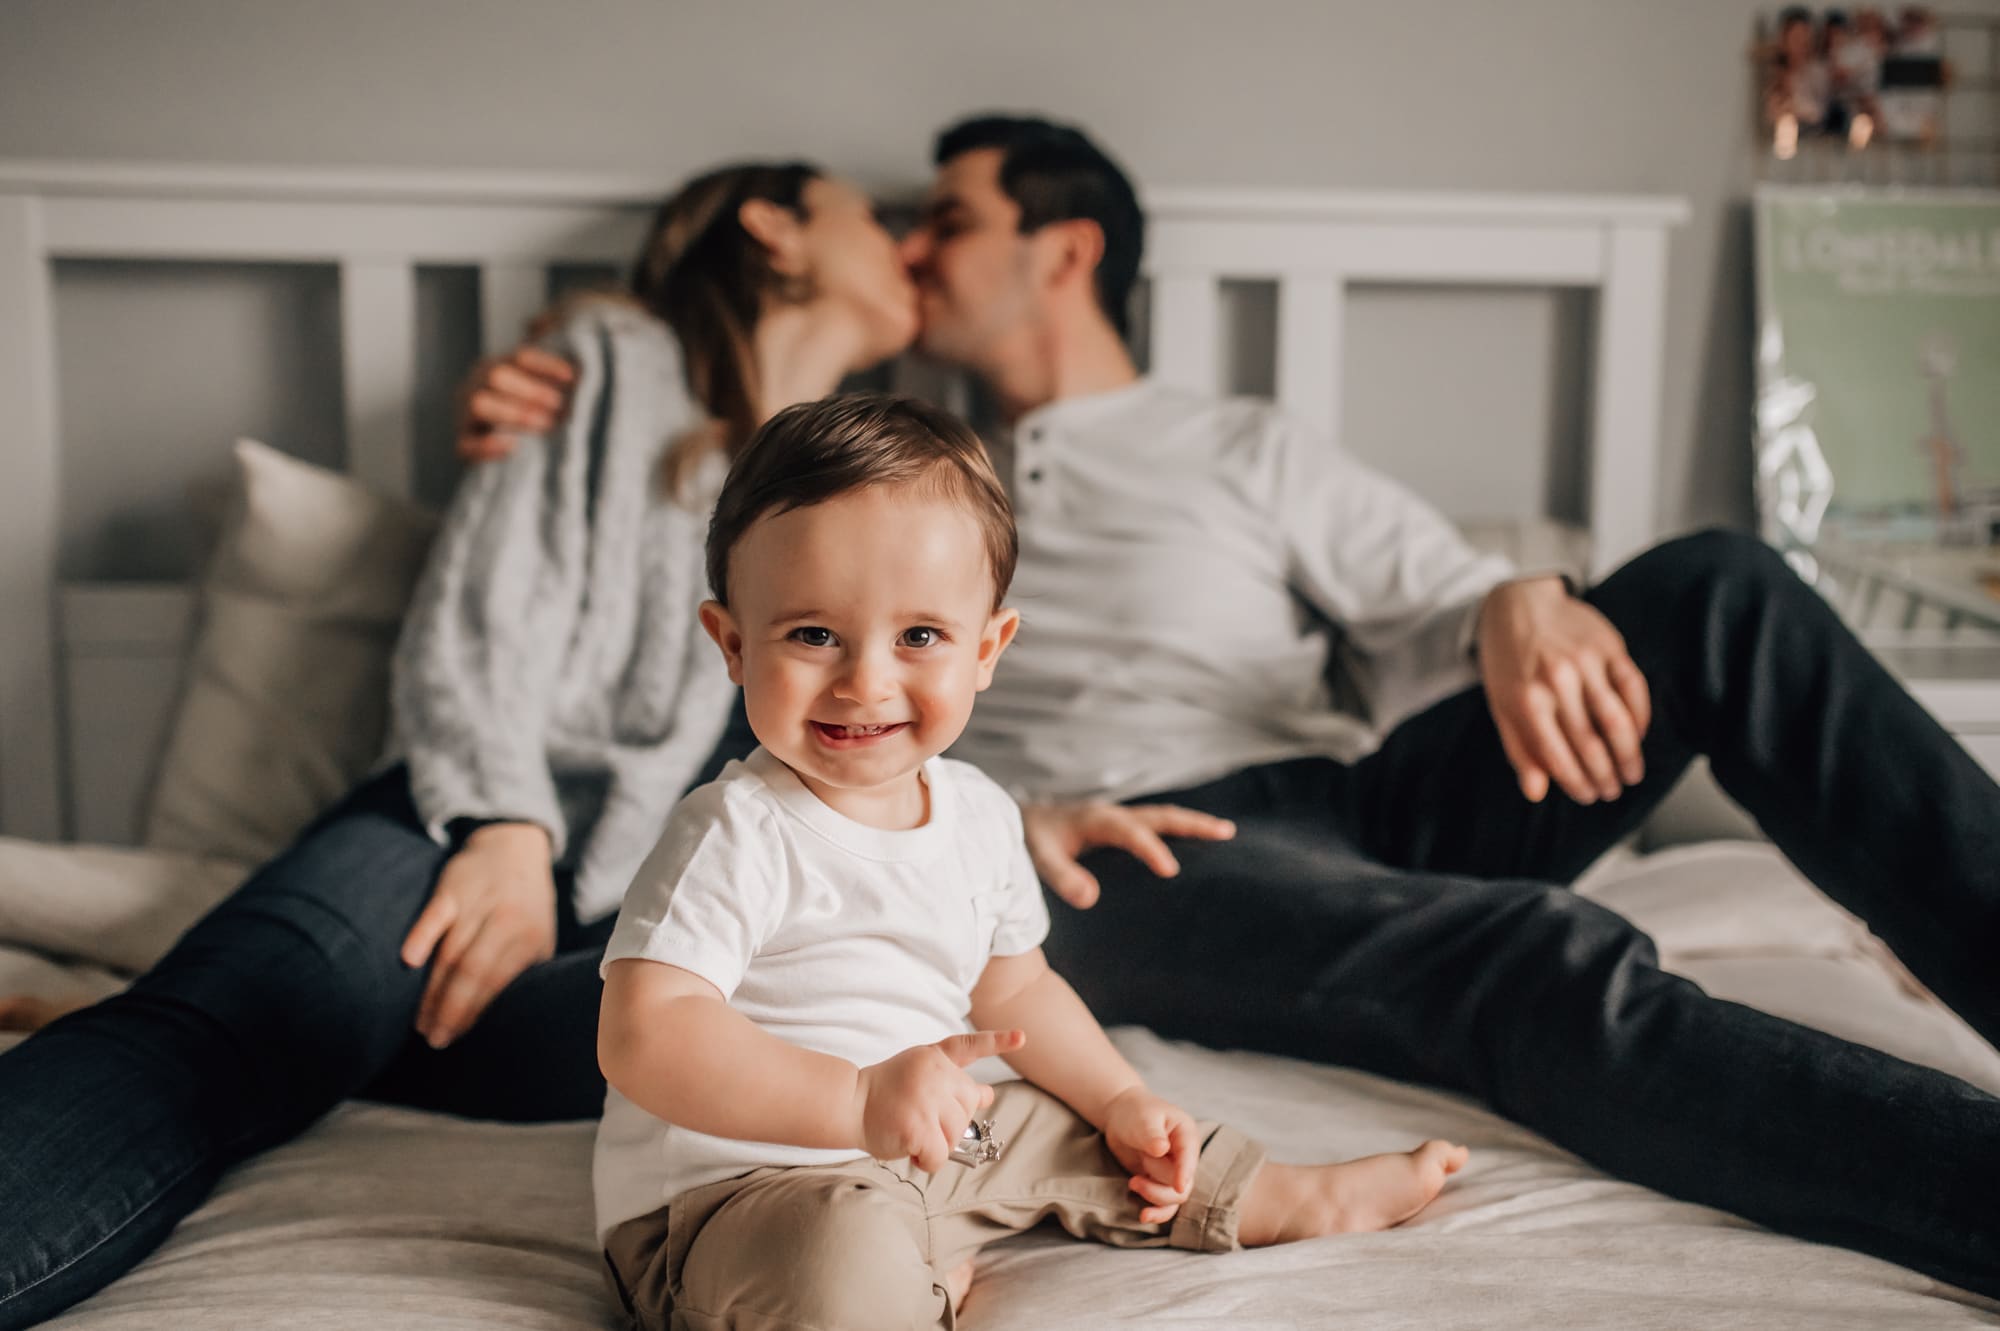 Inhome family photography at its best with laughing child sitting on the bed while parents are kissing in the background.